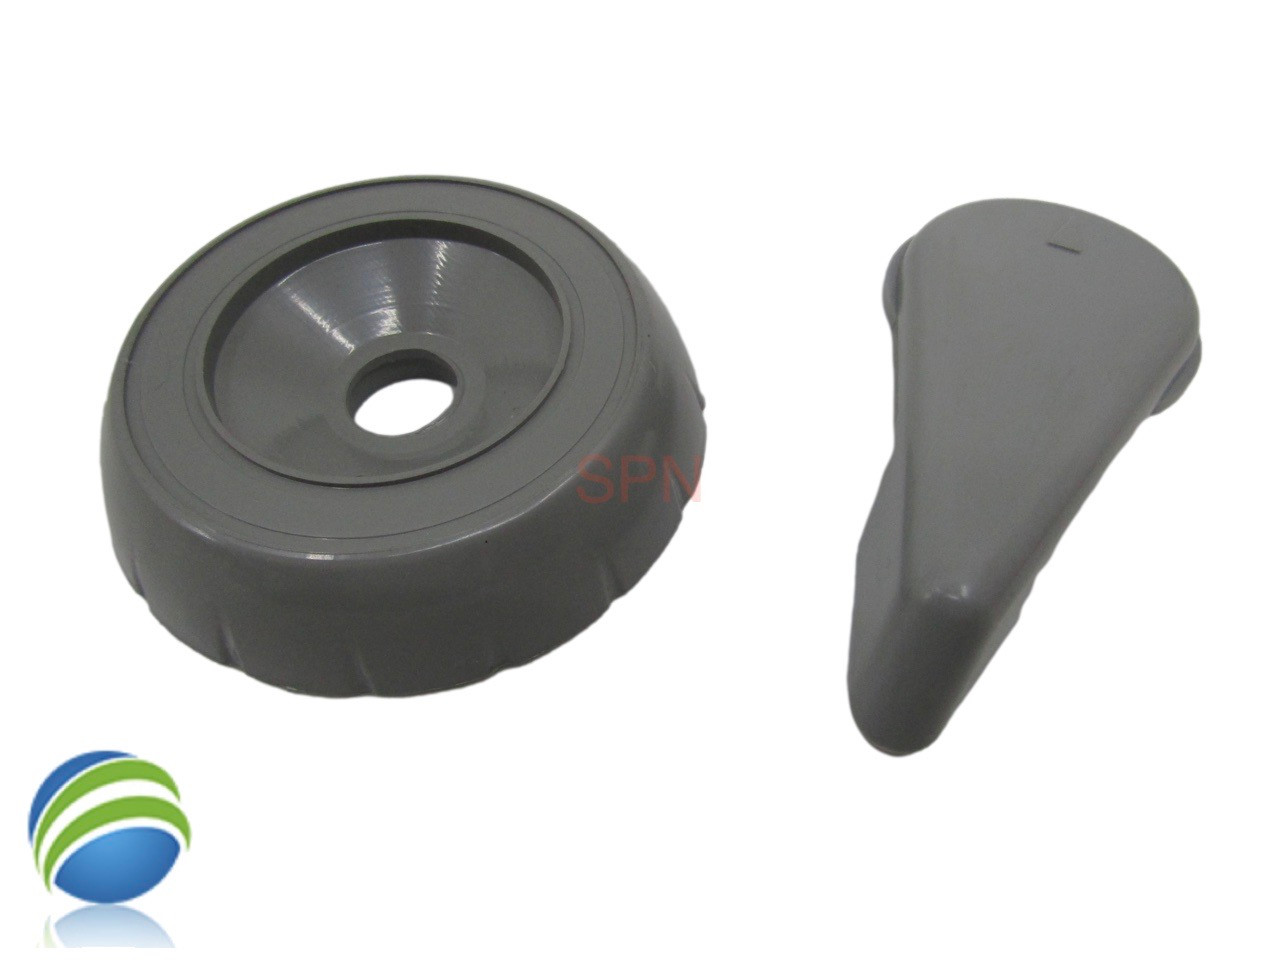 Spa Hot Tub Diverter Handle & Cap 3 3/4" Wide Gray Notched Valve How To Video